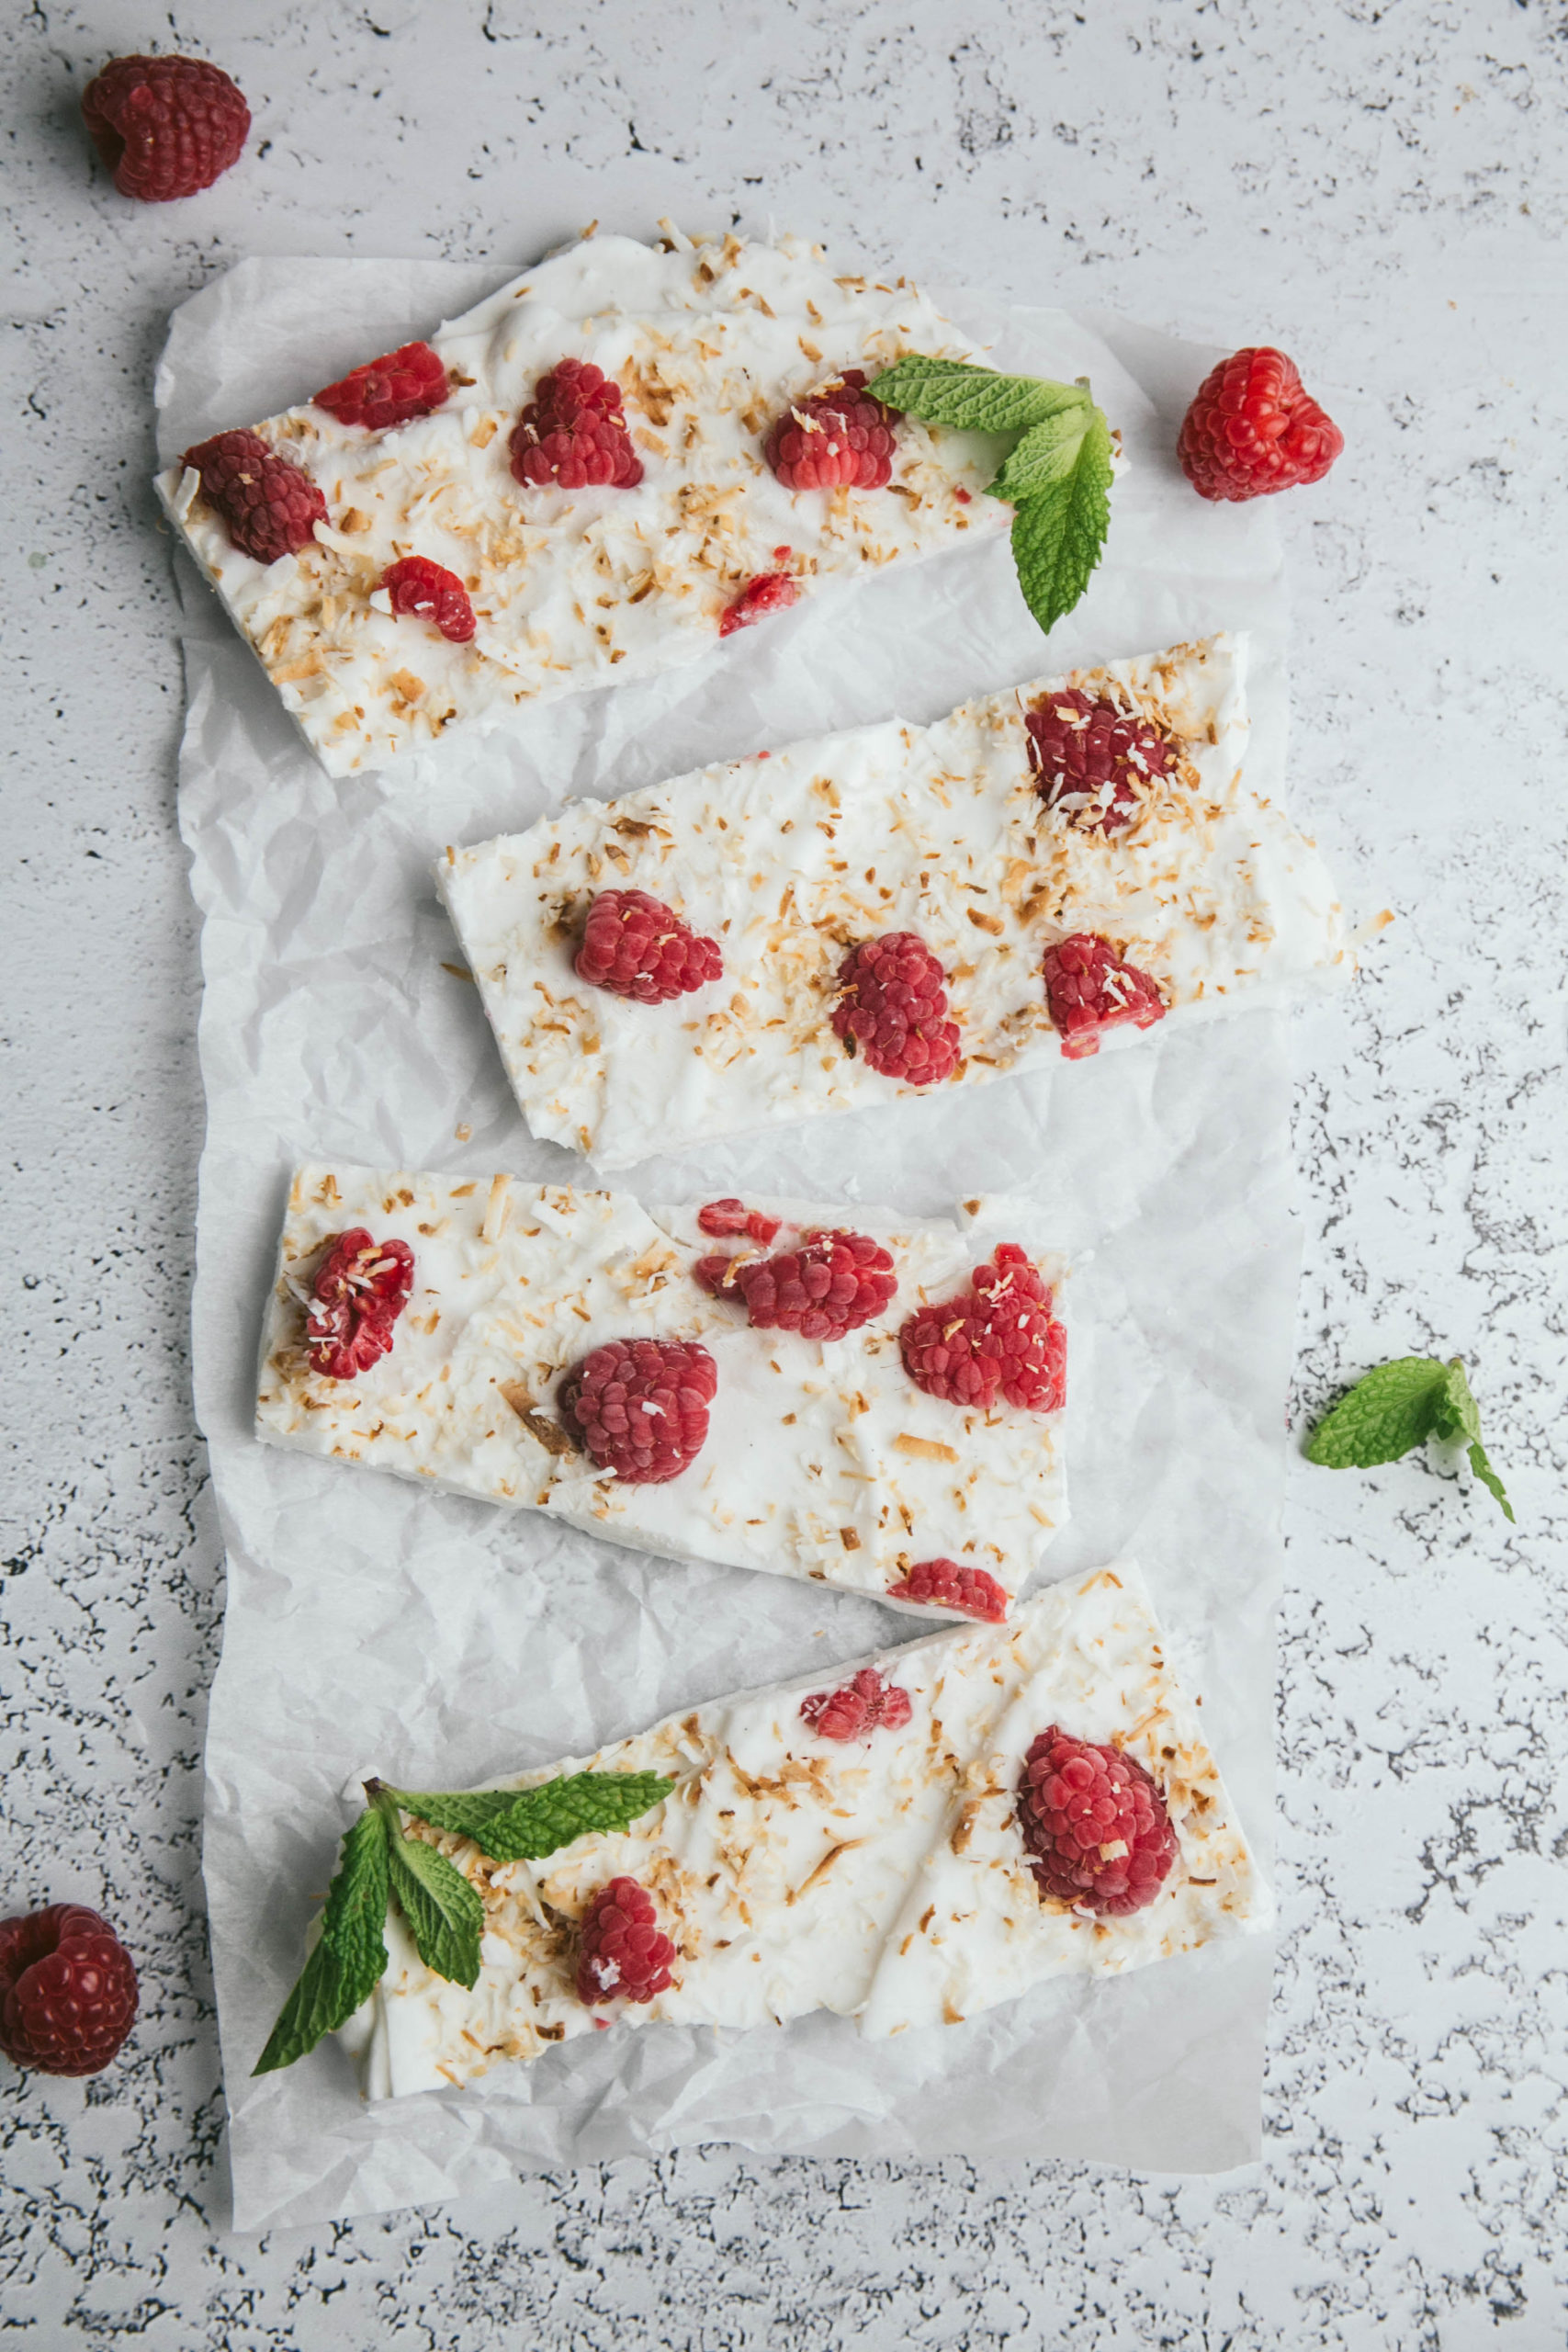 Aerial view of frozen yogurt bars with raspberries, toasted coconut and mint leaves